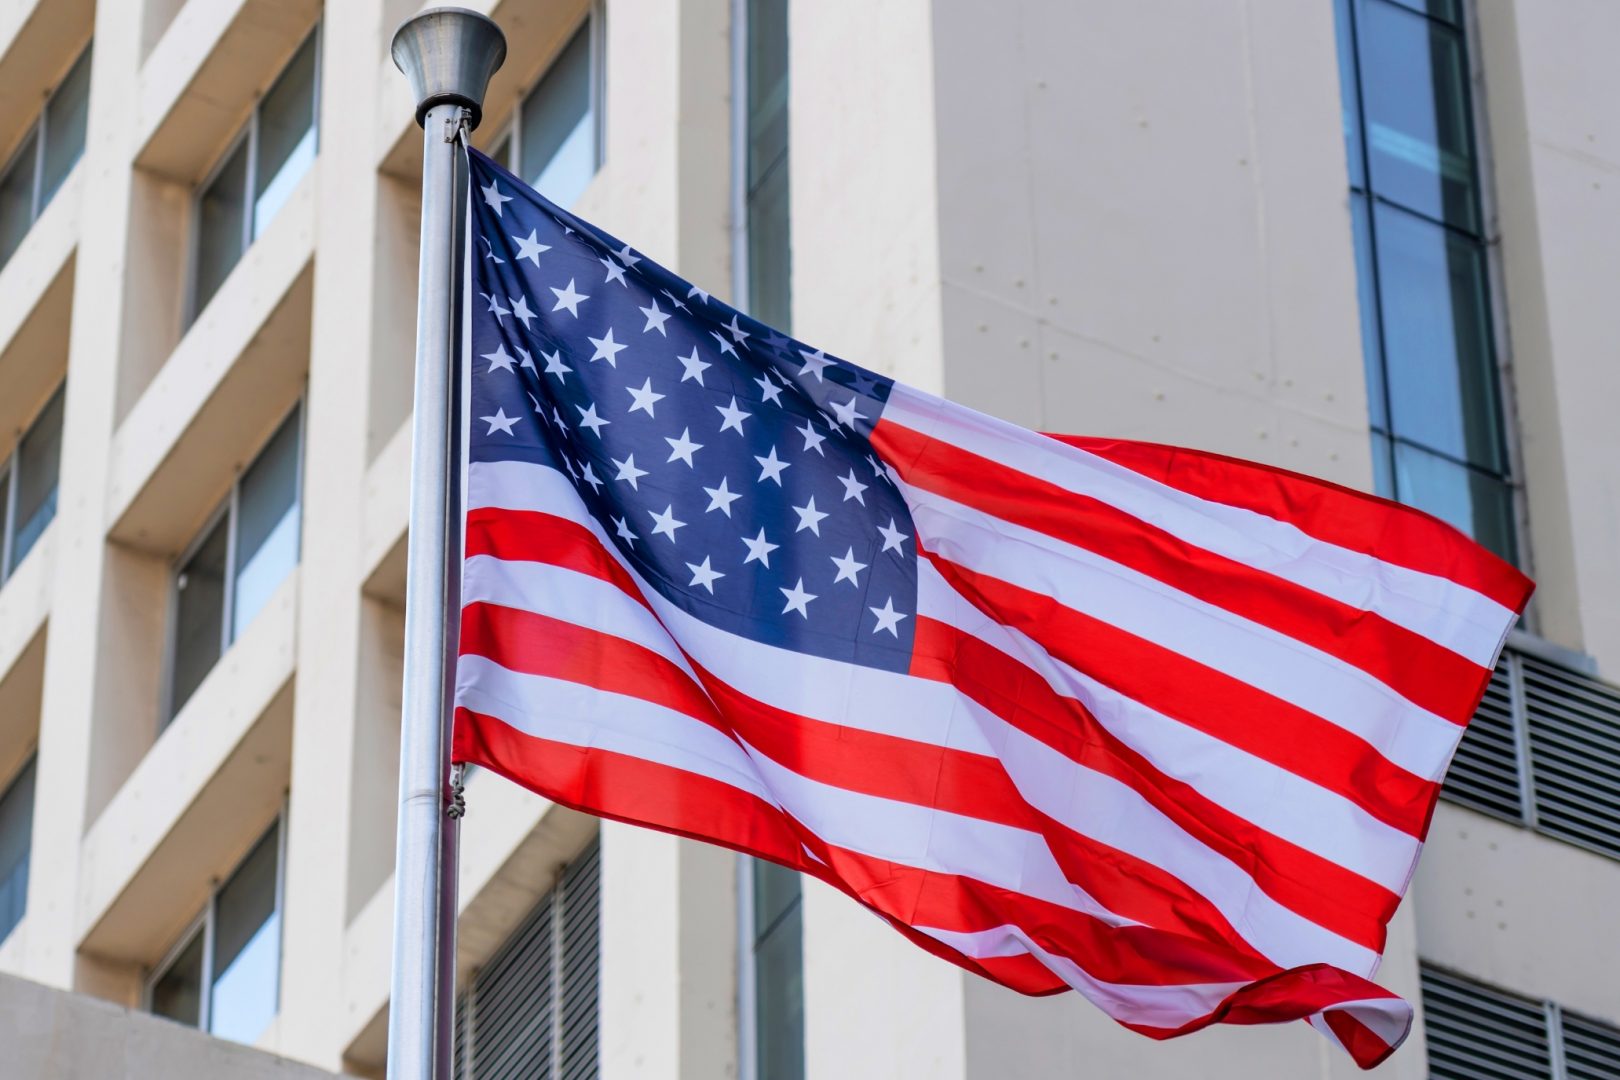 An American flag waving on a flagpole in front of a modern building facade.